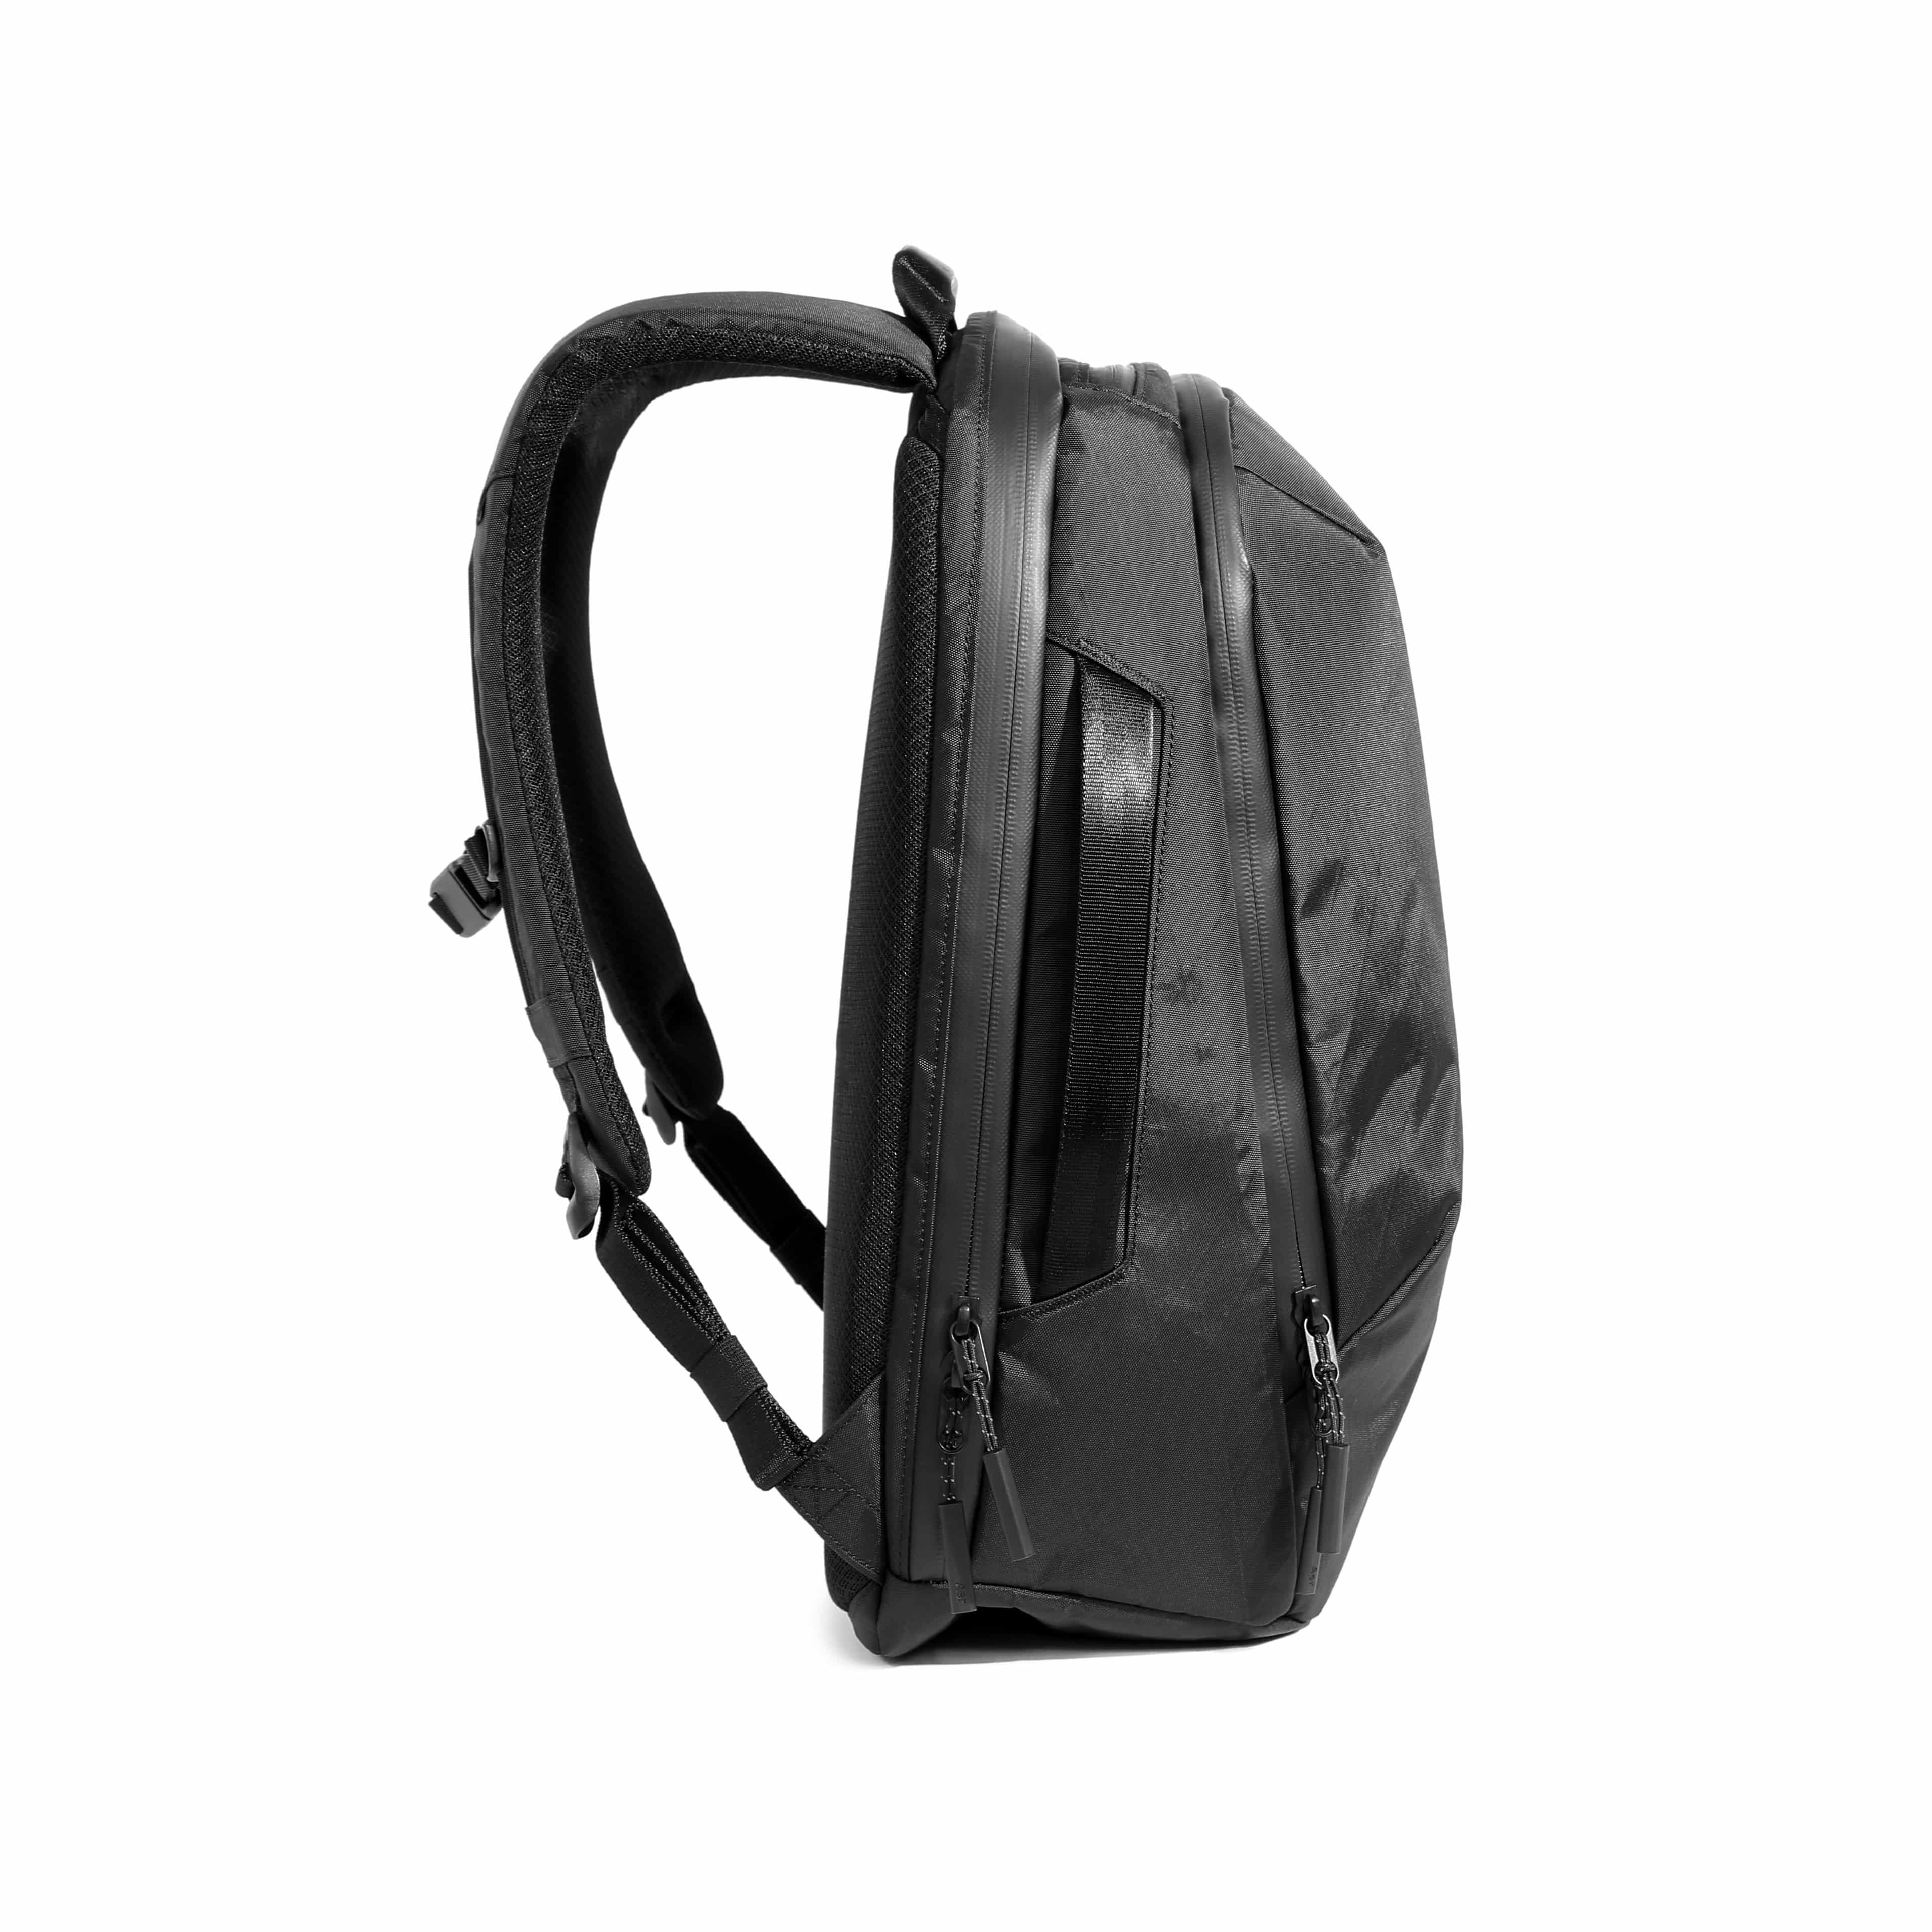 【AER】Day Pack 3 X-Pac